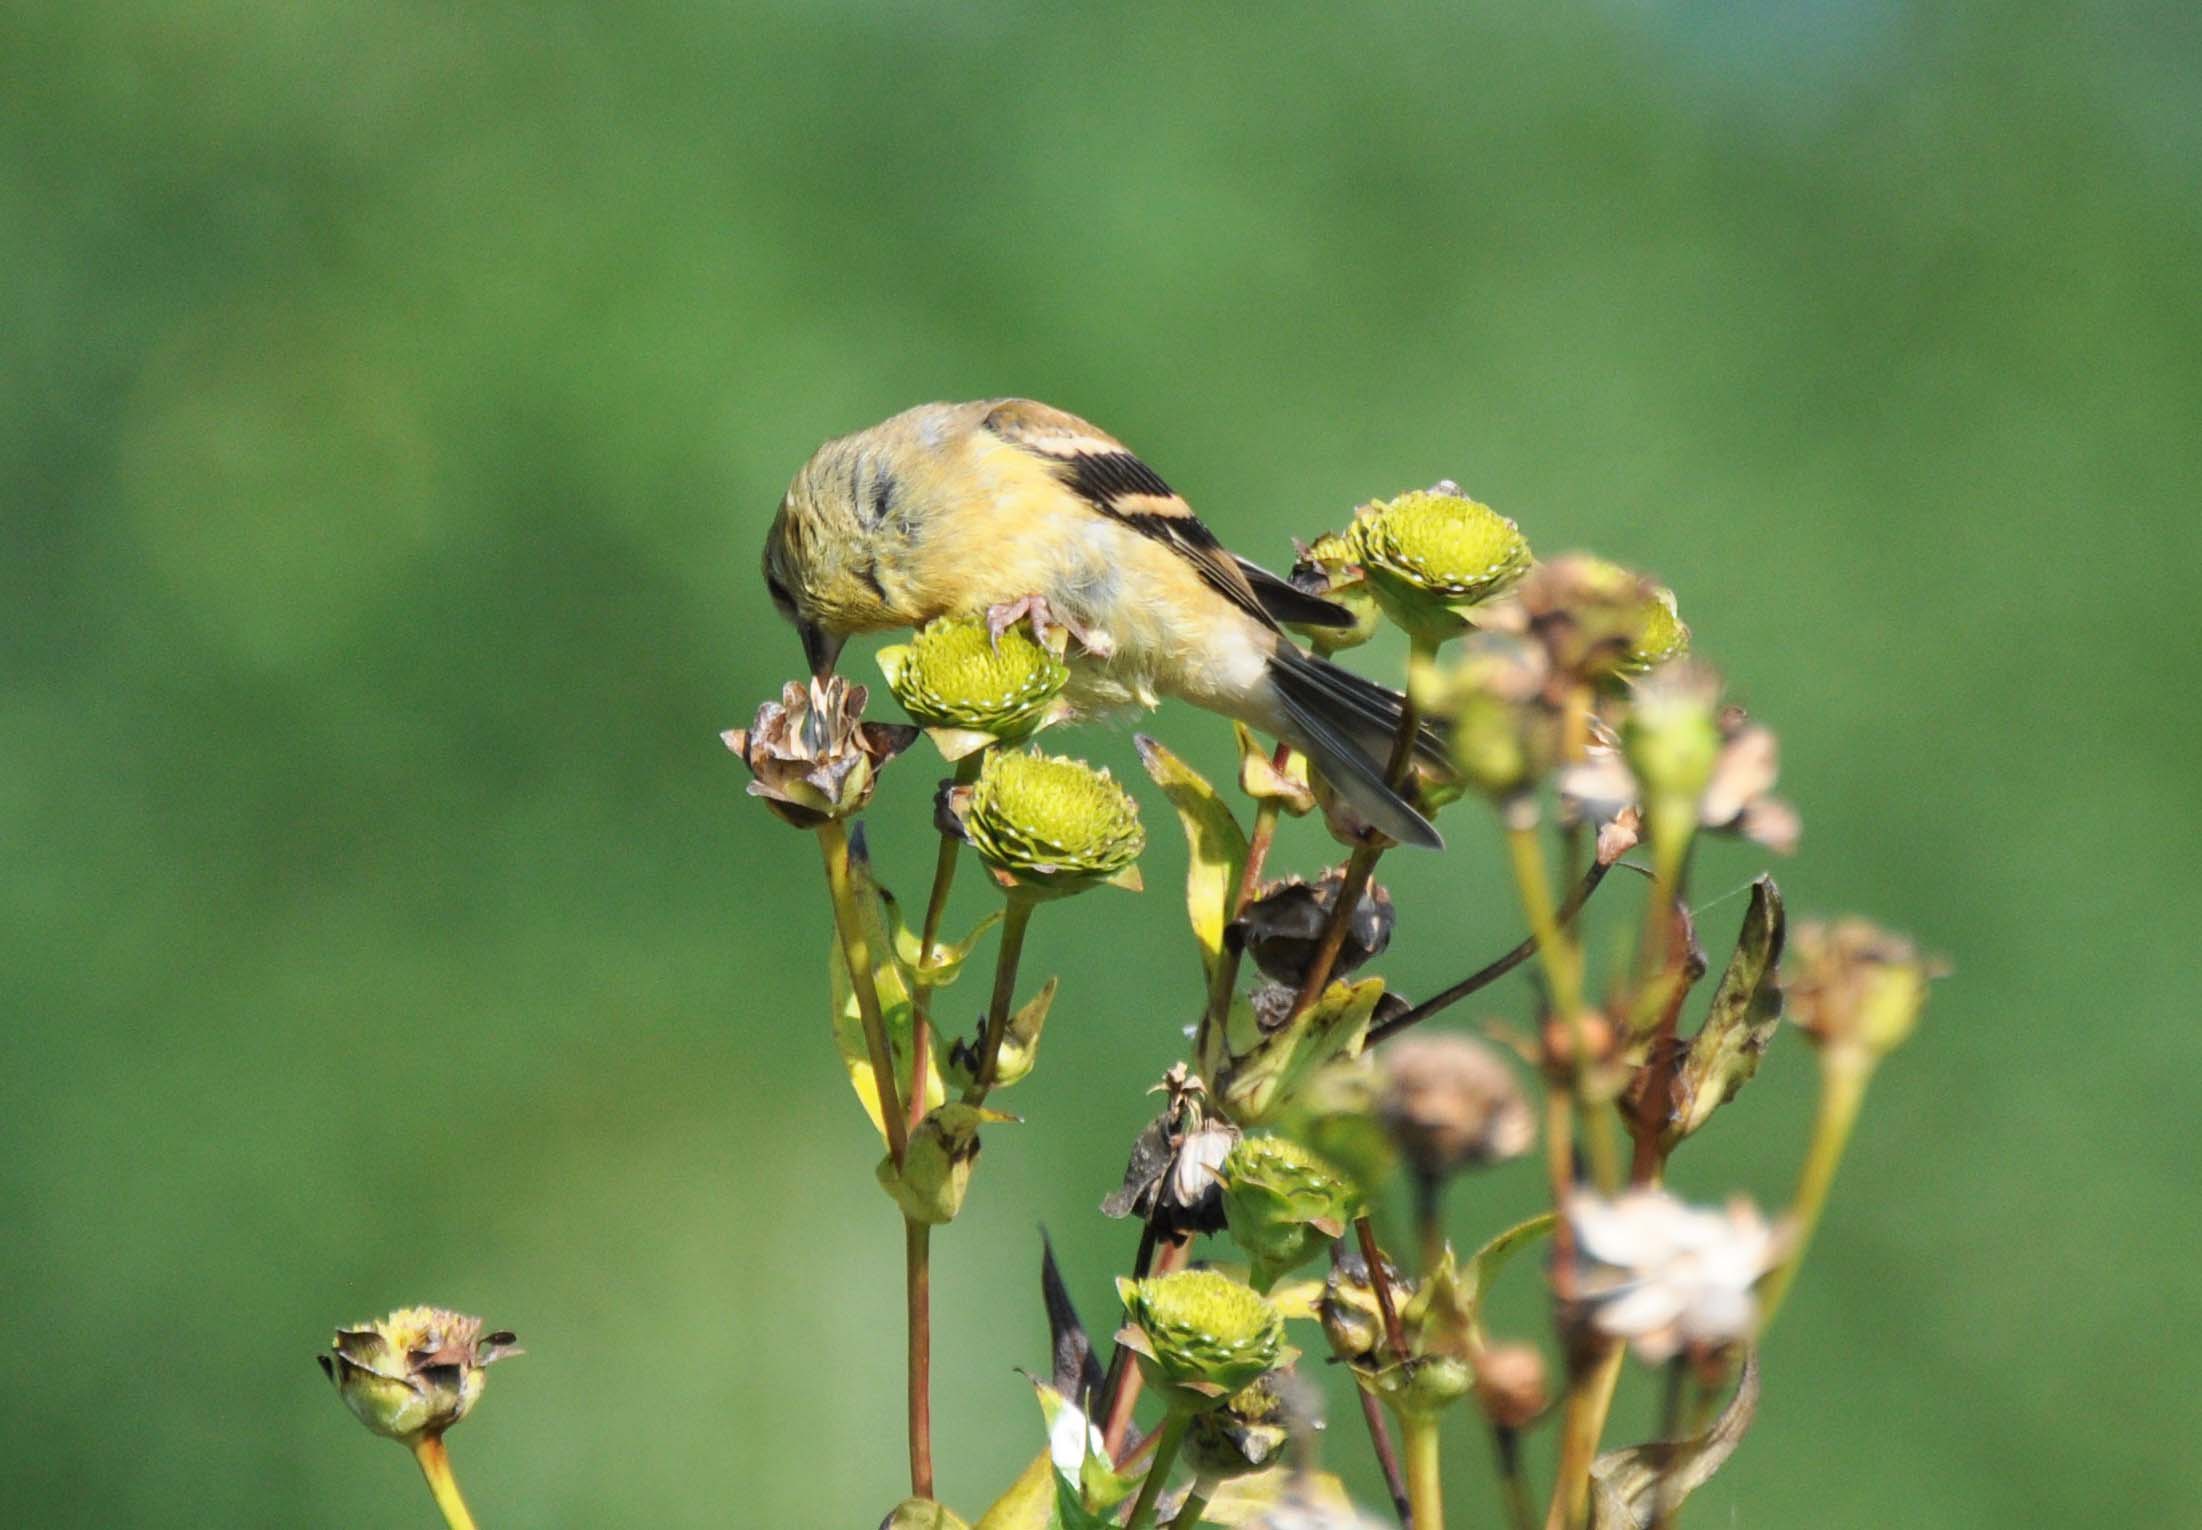 A yellowish bird perched on top of dried flowers, eating seeds